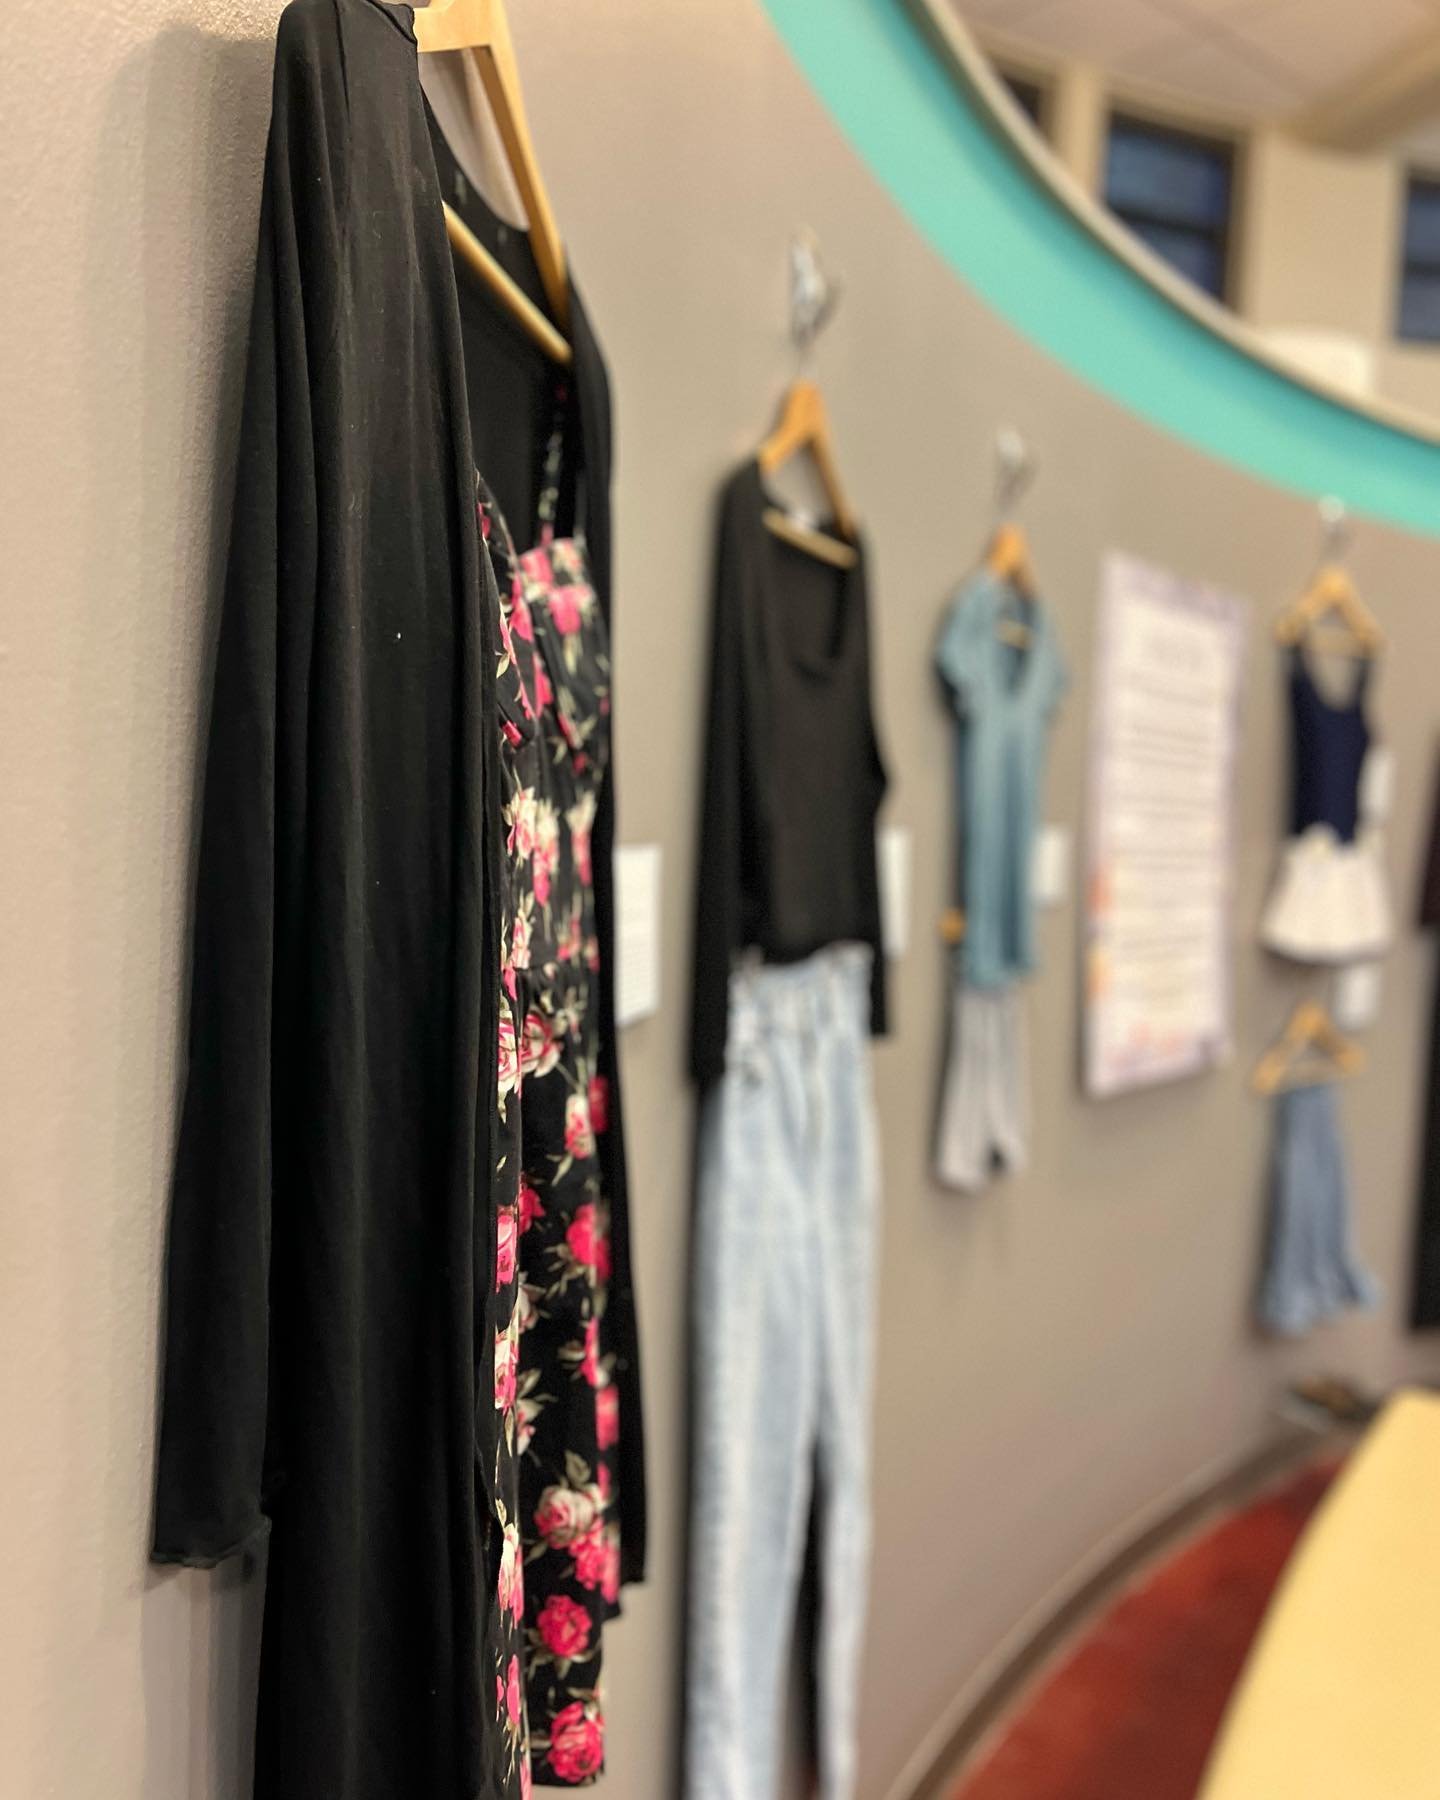 Here are some sneak peaks of the &ldquo;What We Wore&rdquo; exhibit at the @mwwtm !! To see the rest, come check out the 17 outfit exhibit during the museums business hours. For questions, please send us a DM and we will get back to you as soon as po